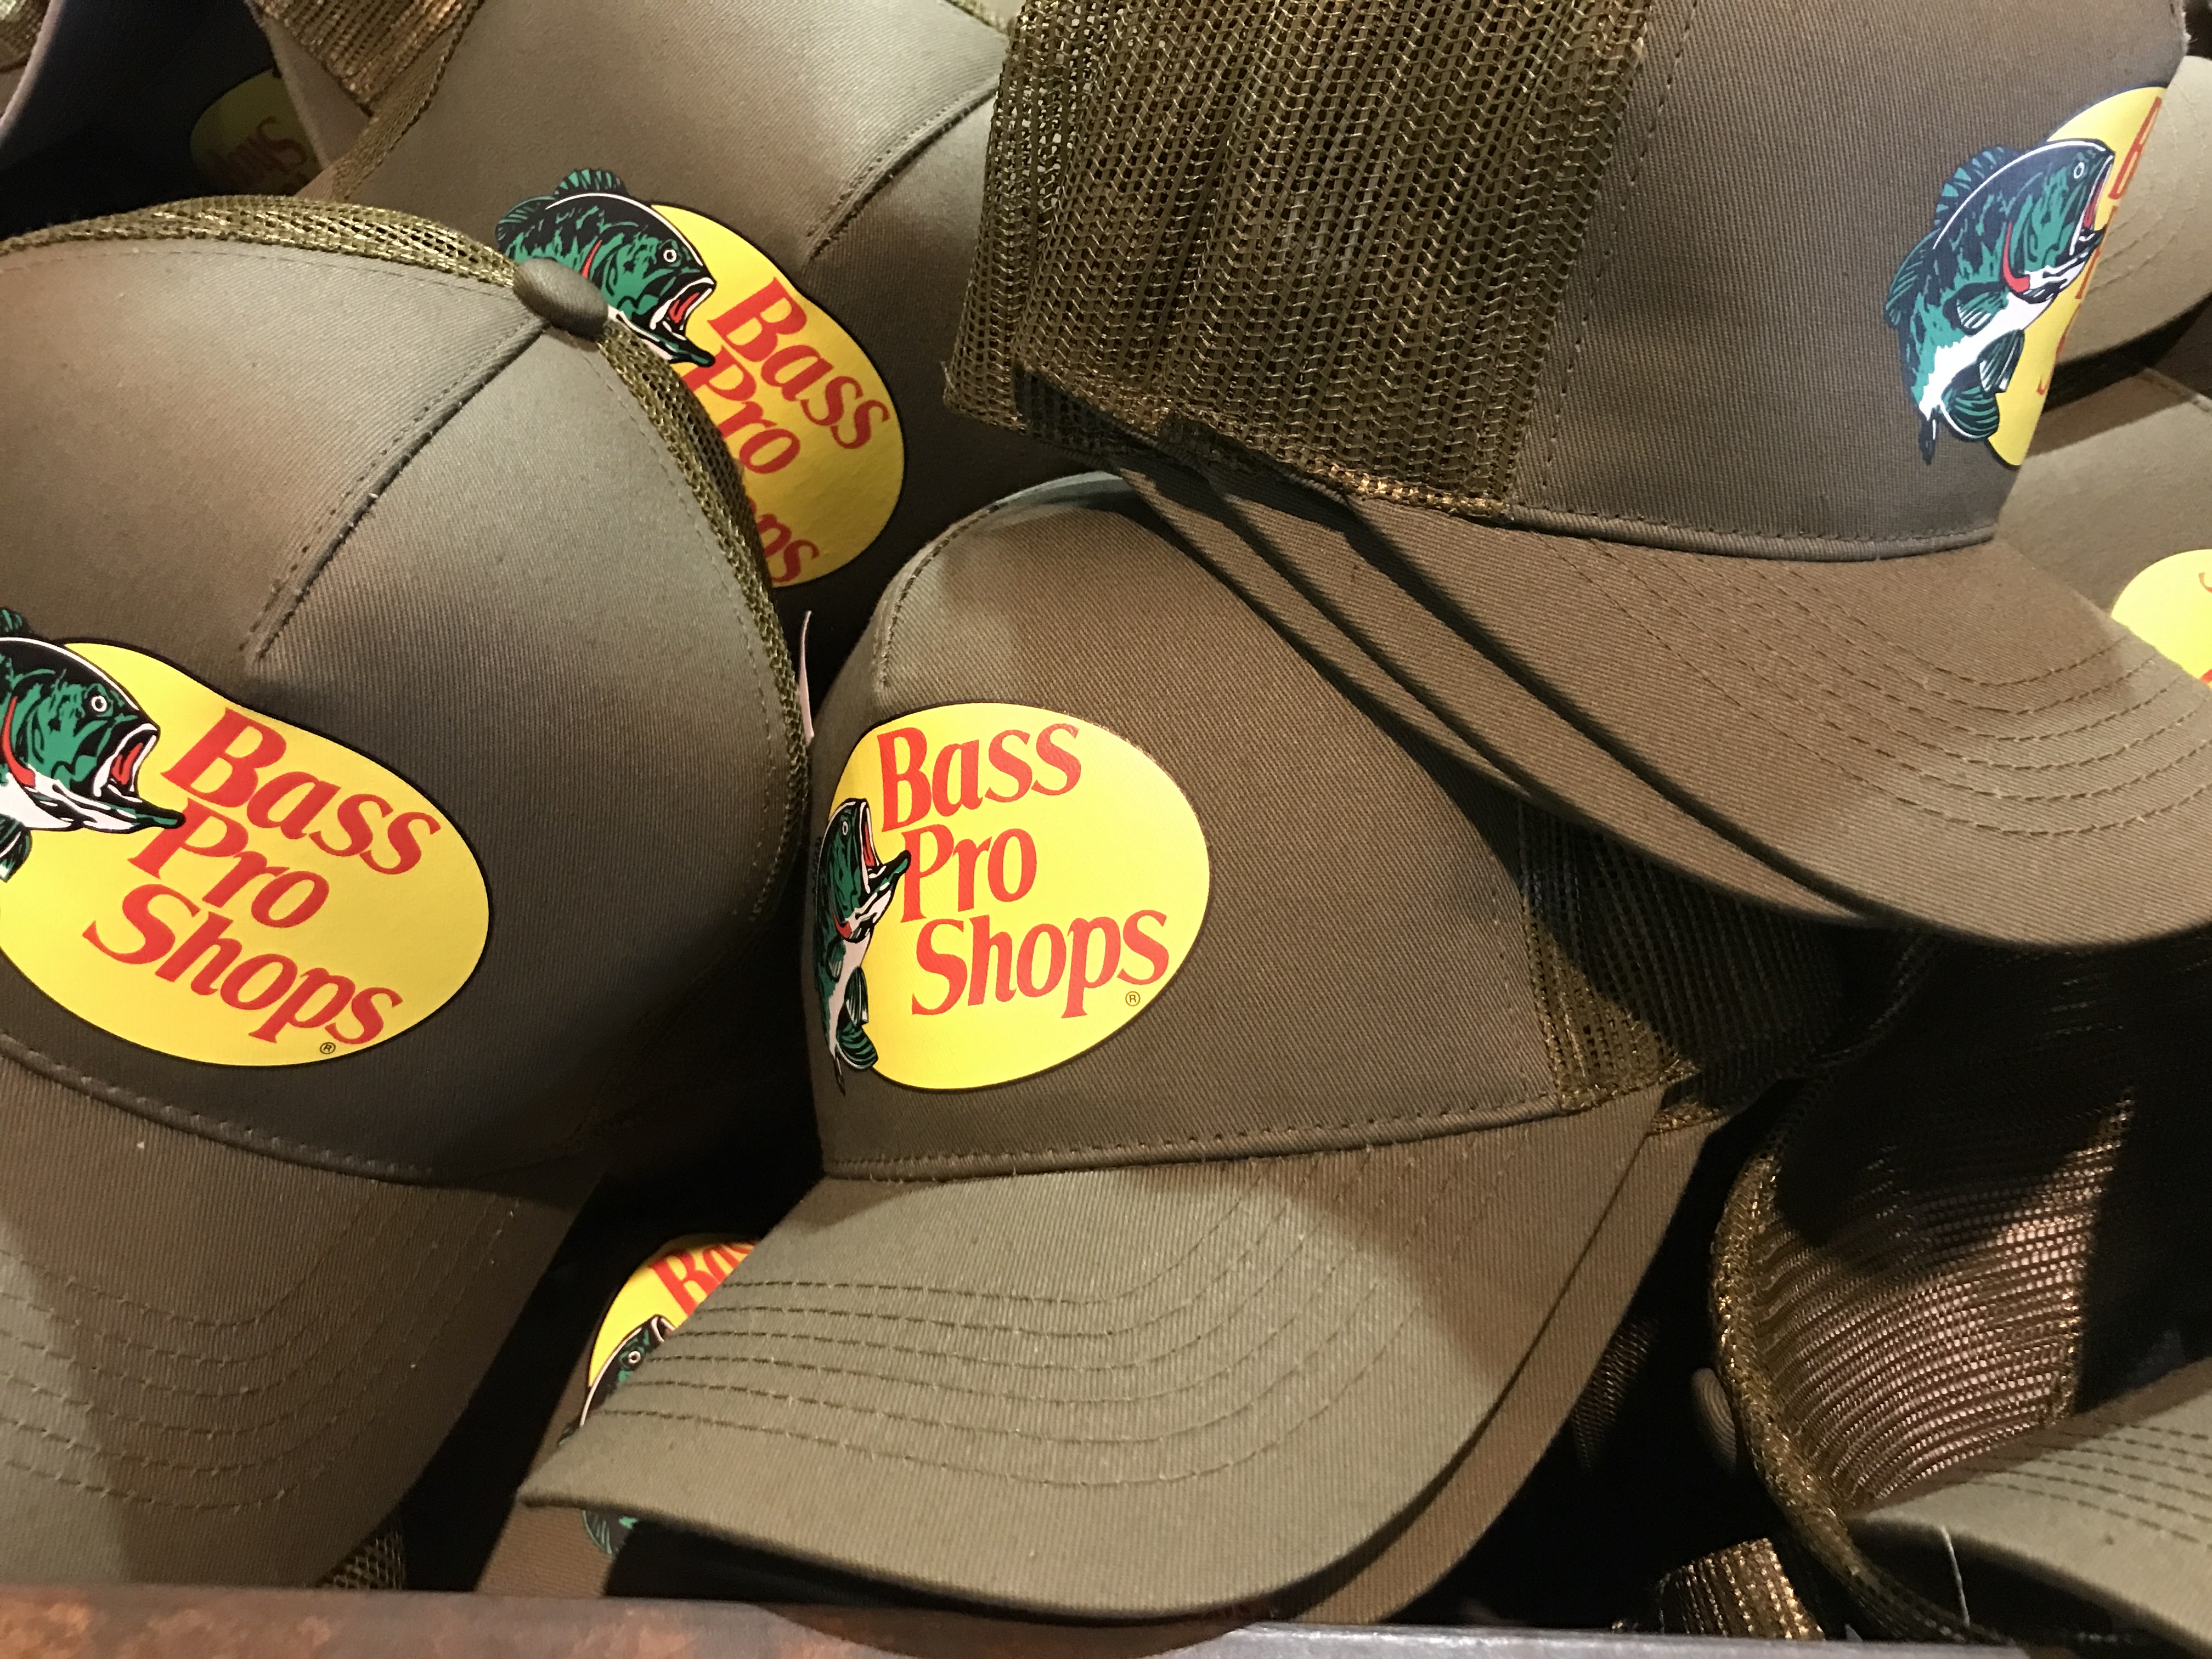 Bass Pro - Rancho on X: New color! Olive green is now available